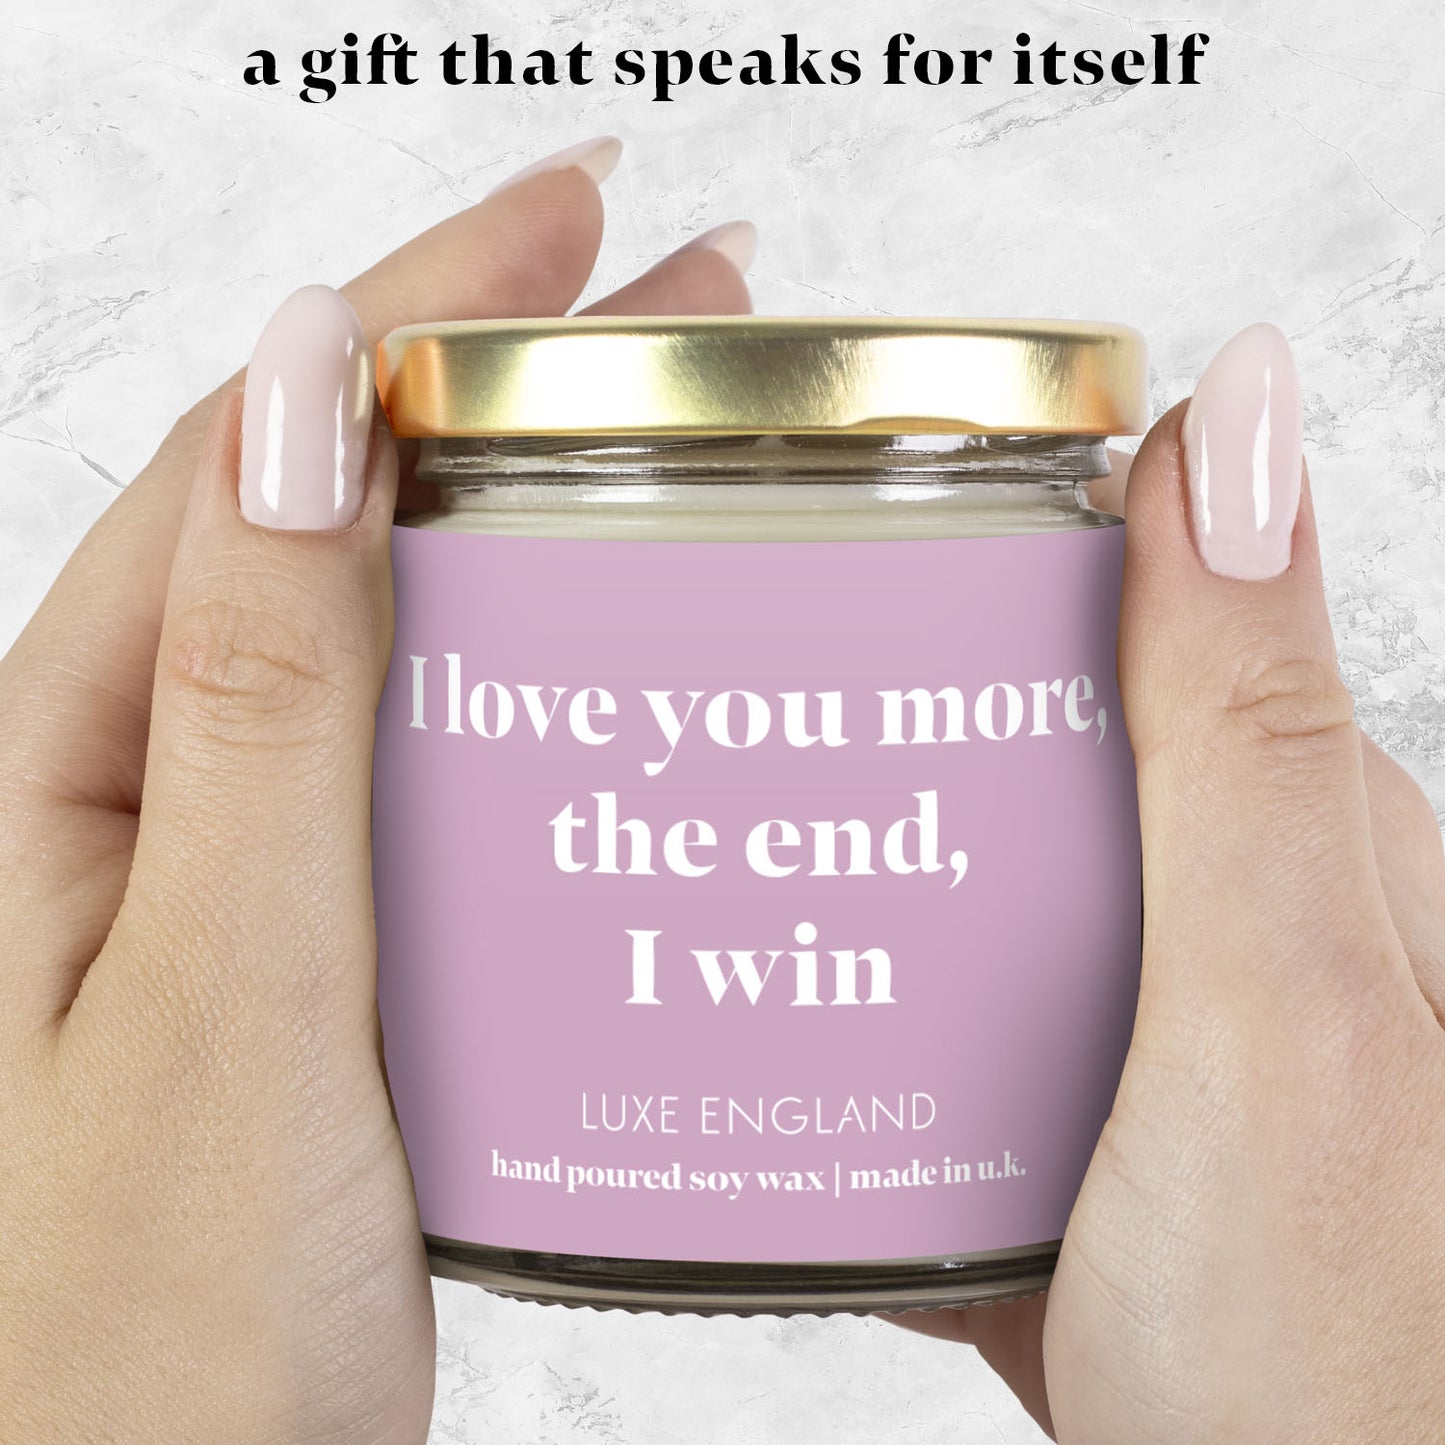 Message Candle (i love you more, the end, i win)